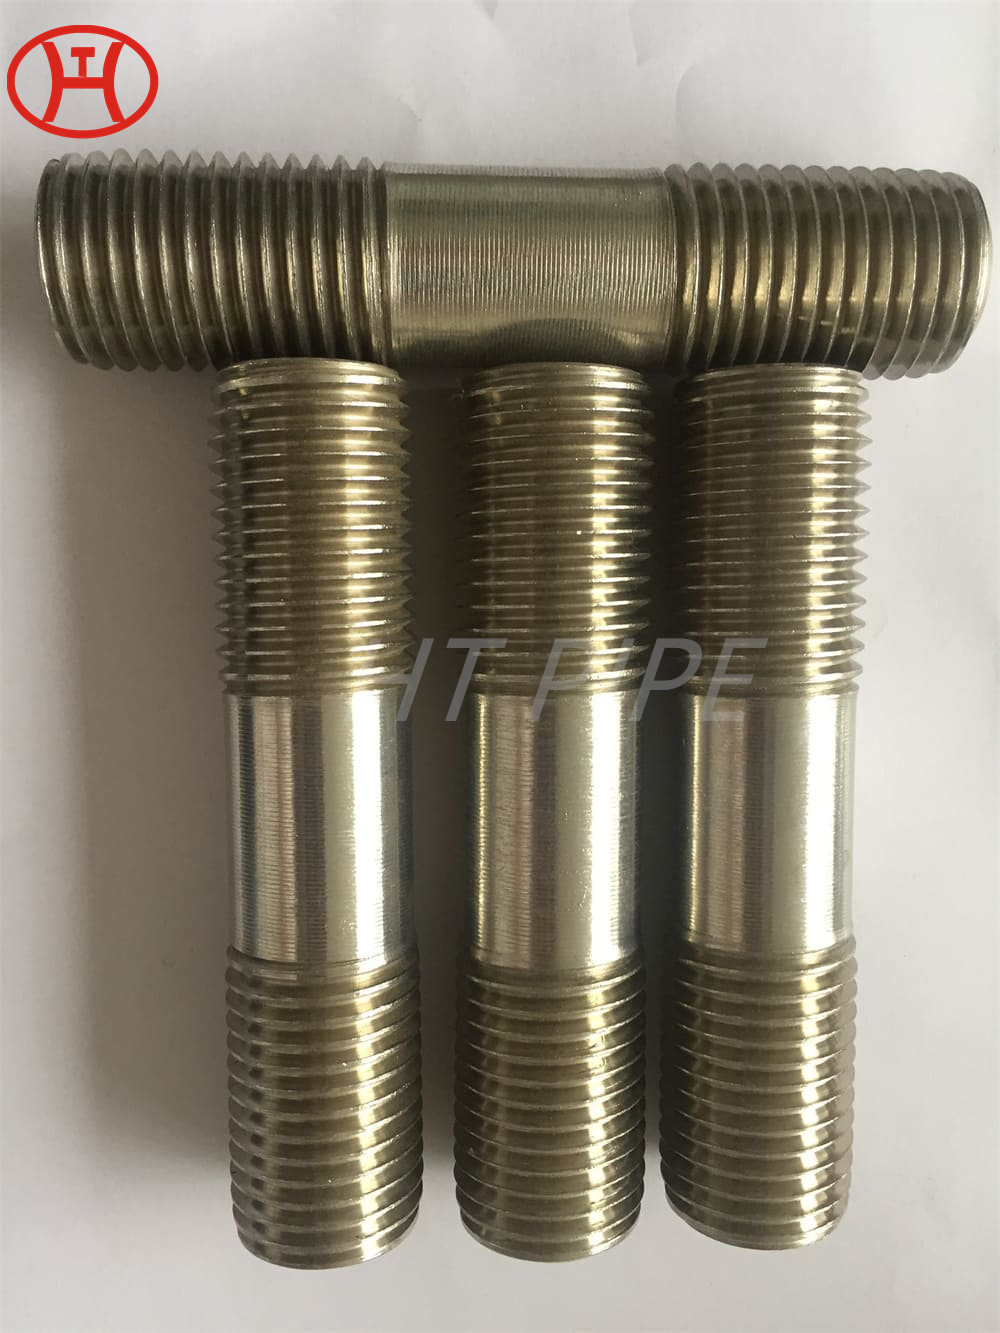 DIN976 UNS N08810-Incoloy 800H partial thread Nature Nickel Alloy hex bolt 1-2-13 Incoloy 800H hex bolt stub bolt